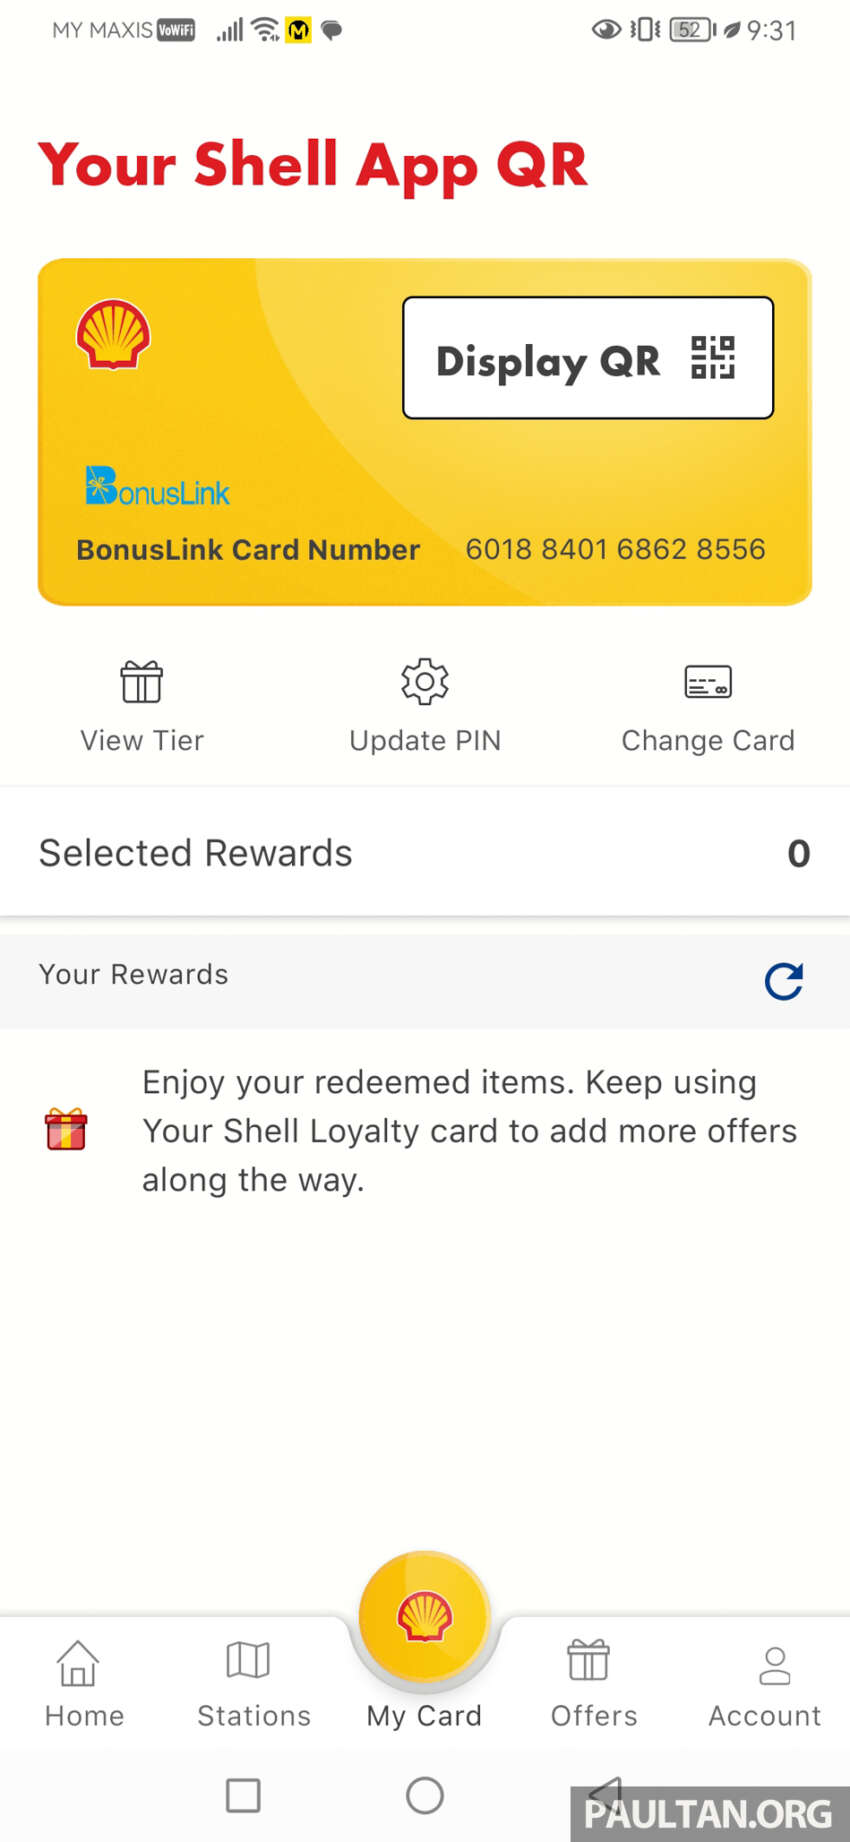 Shell Asia mobile app now online in Malaysia – pay for fuel, collect rewards points, integrated with BonusLink 1650602